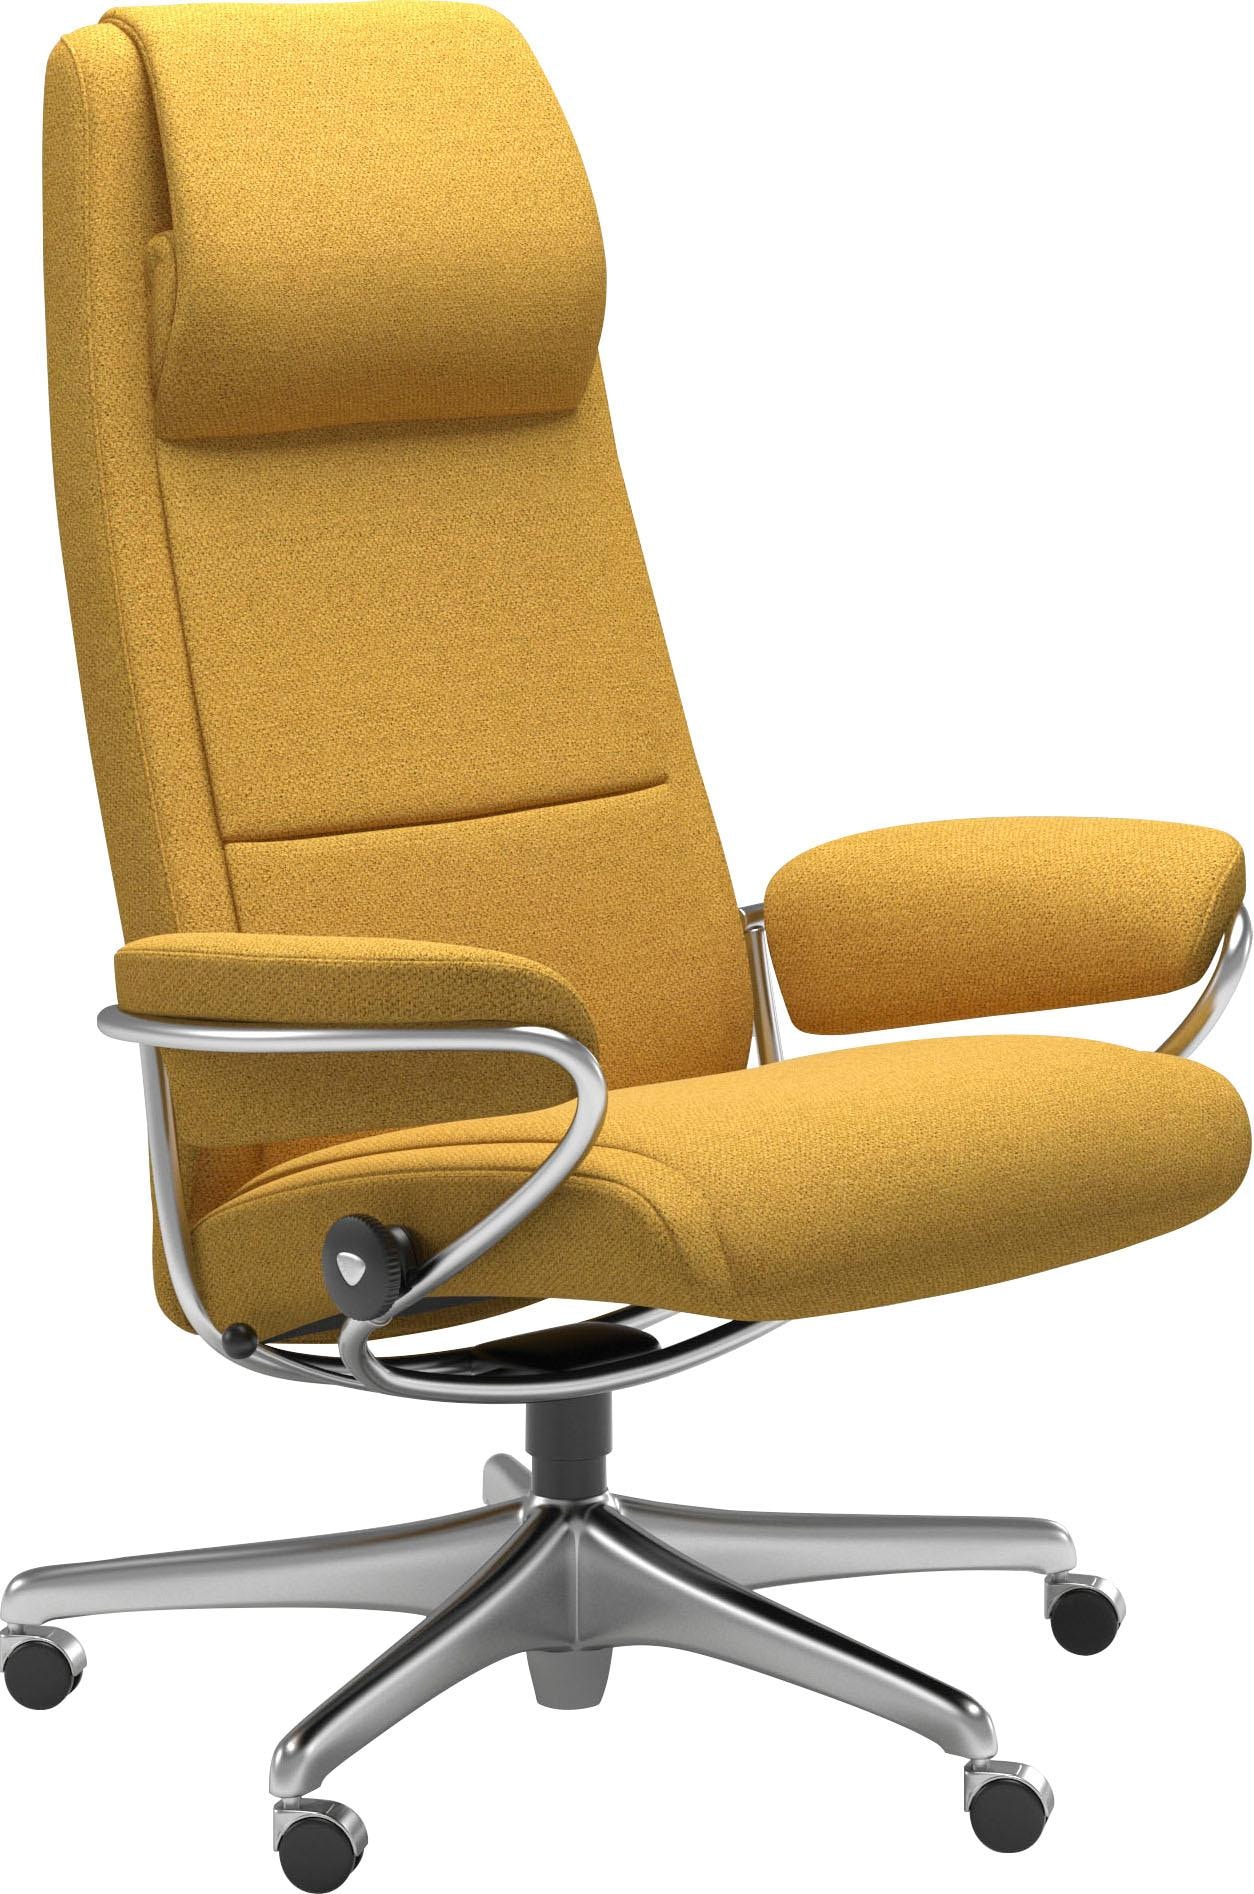 Office Home OTTO Gestell Chrom High Shop Base, »Paris«, Relaxsessel mit Stressless® Online Back,